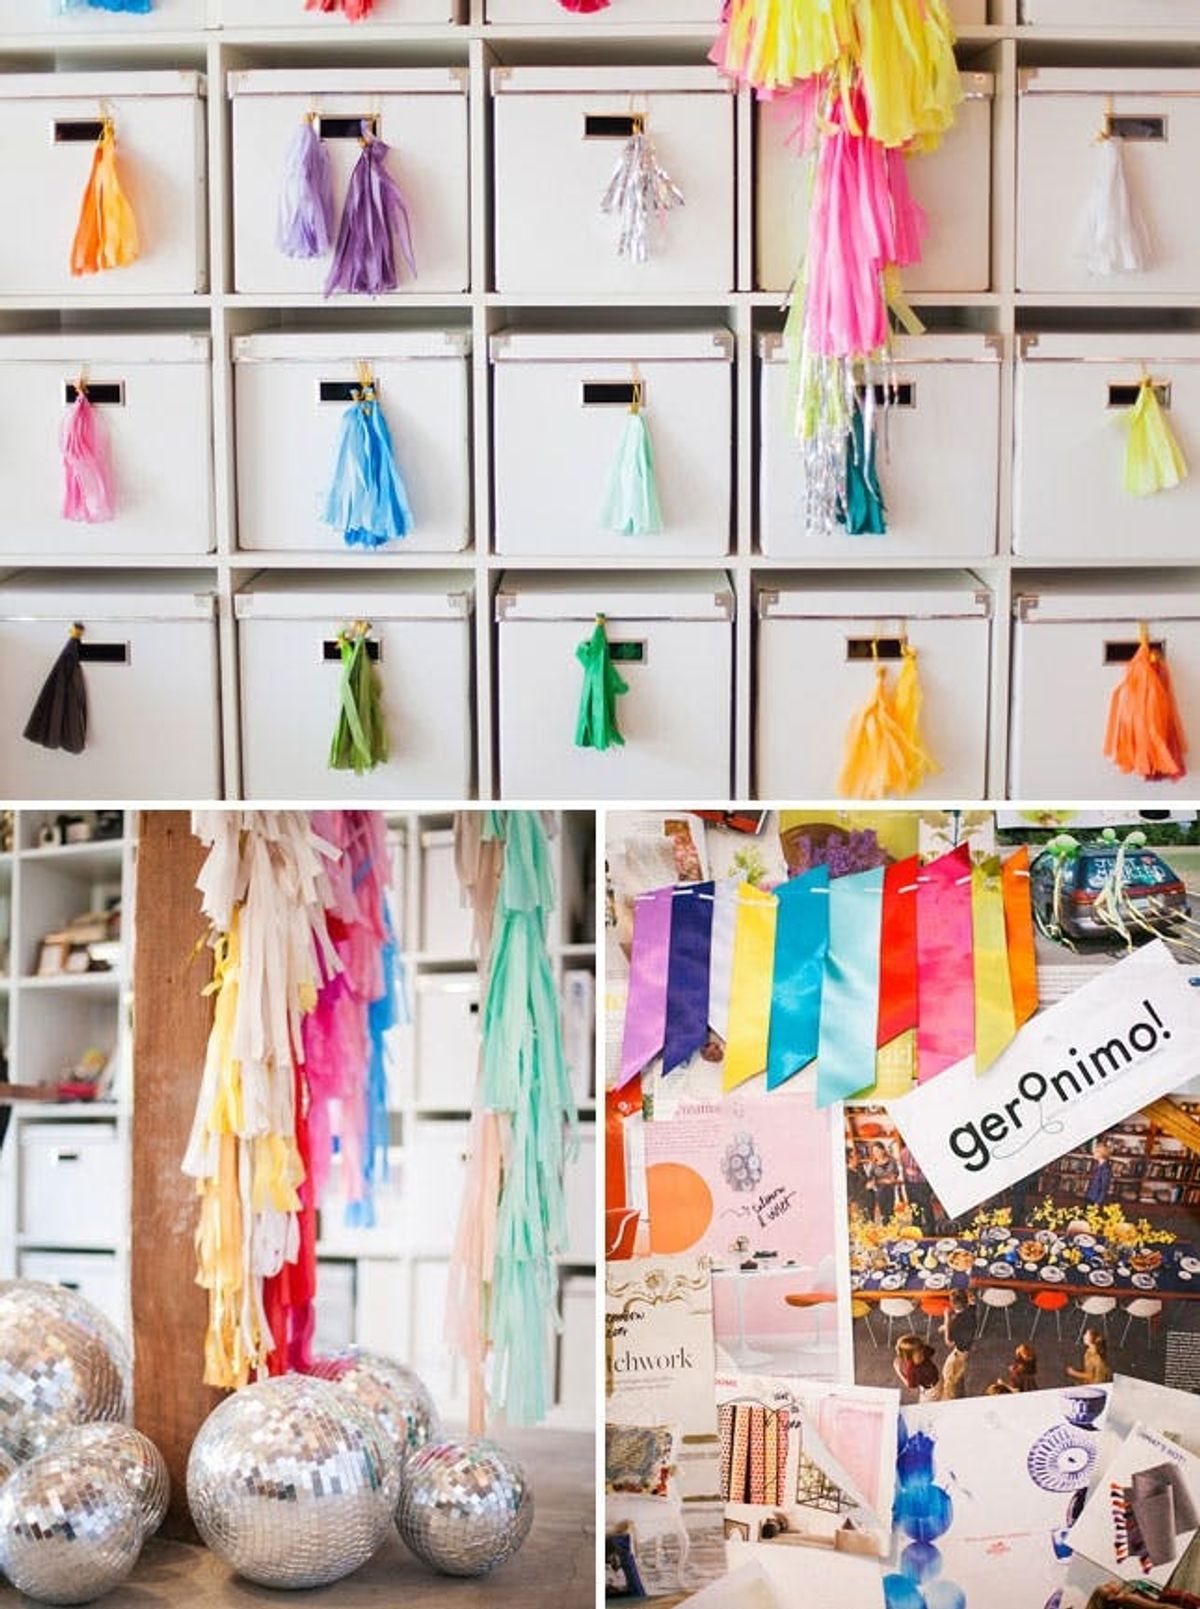 Maker Spaces: 15 Incredible Studios, Shops, and Craft Rooms